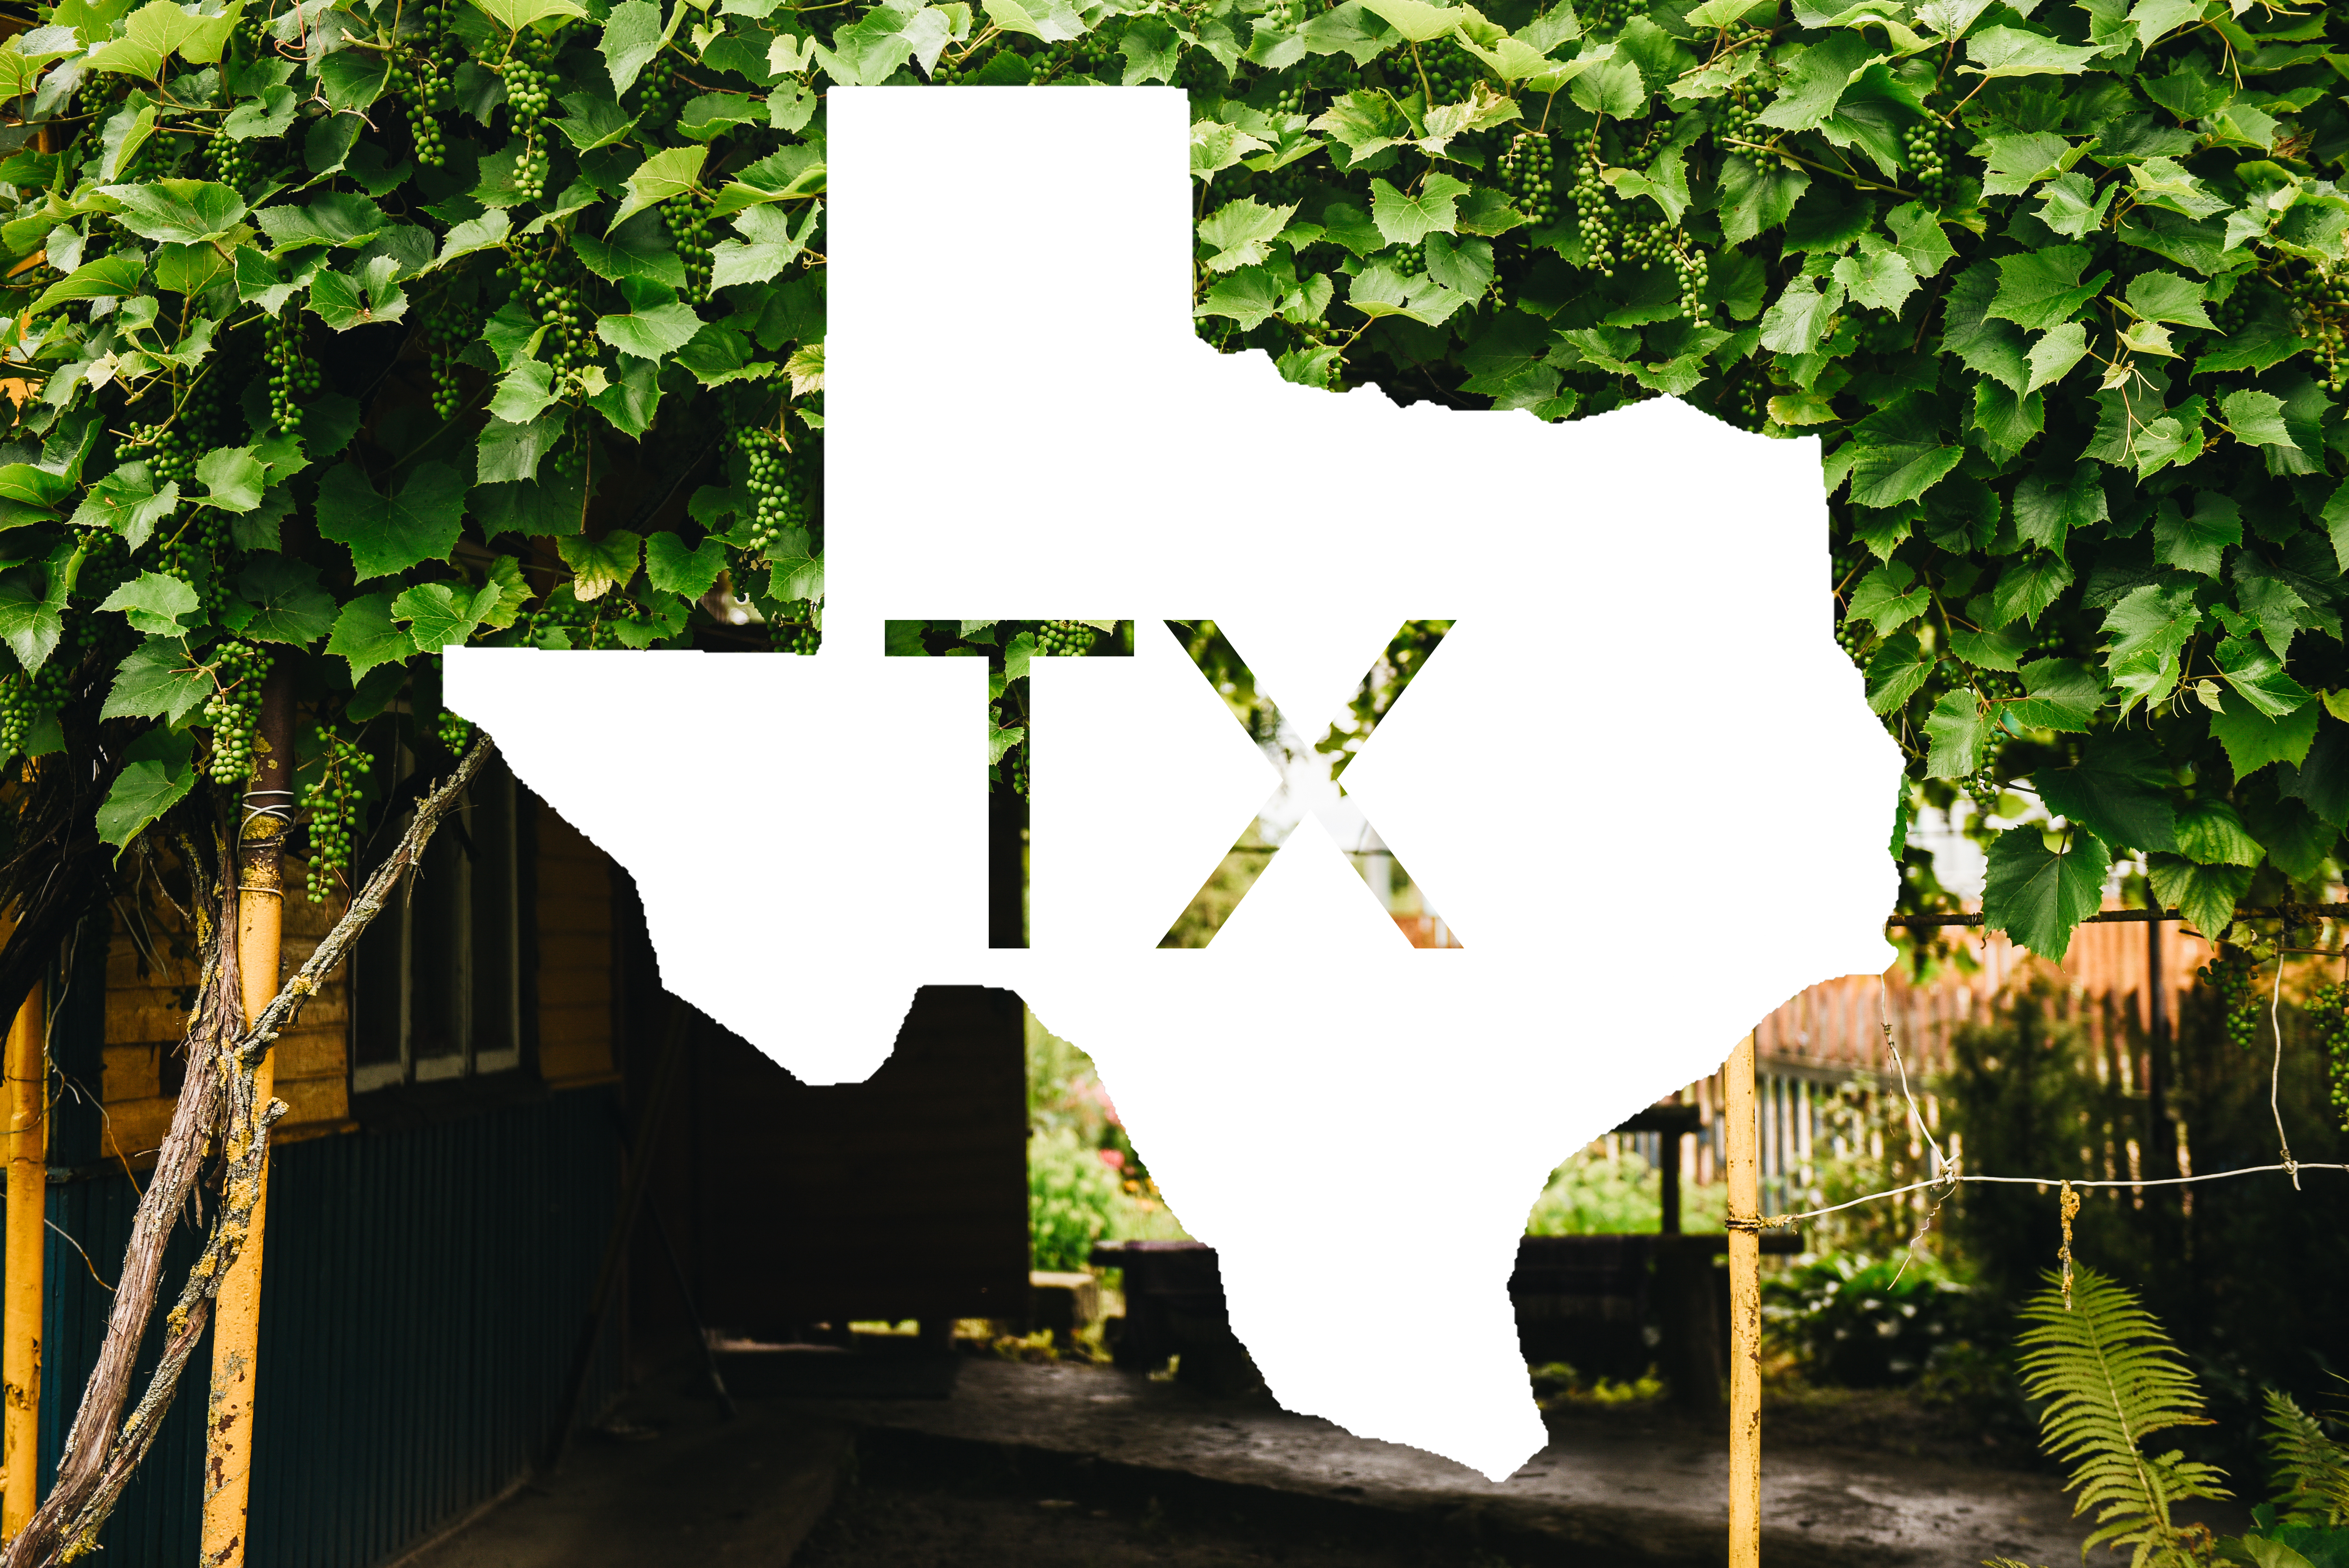 Silhouette of the state of Texas with TX written, overlaid on a wine Texan vineyard background